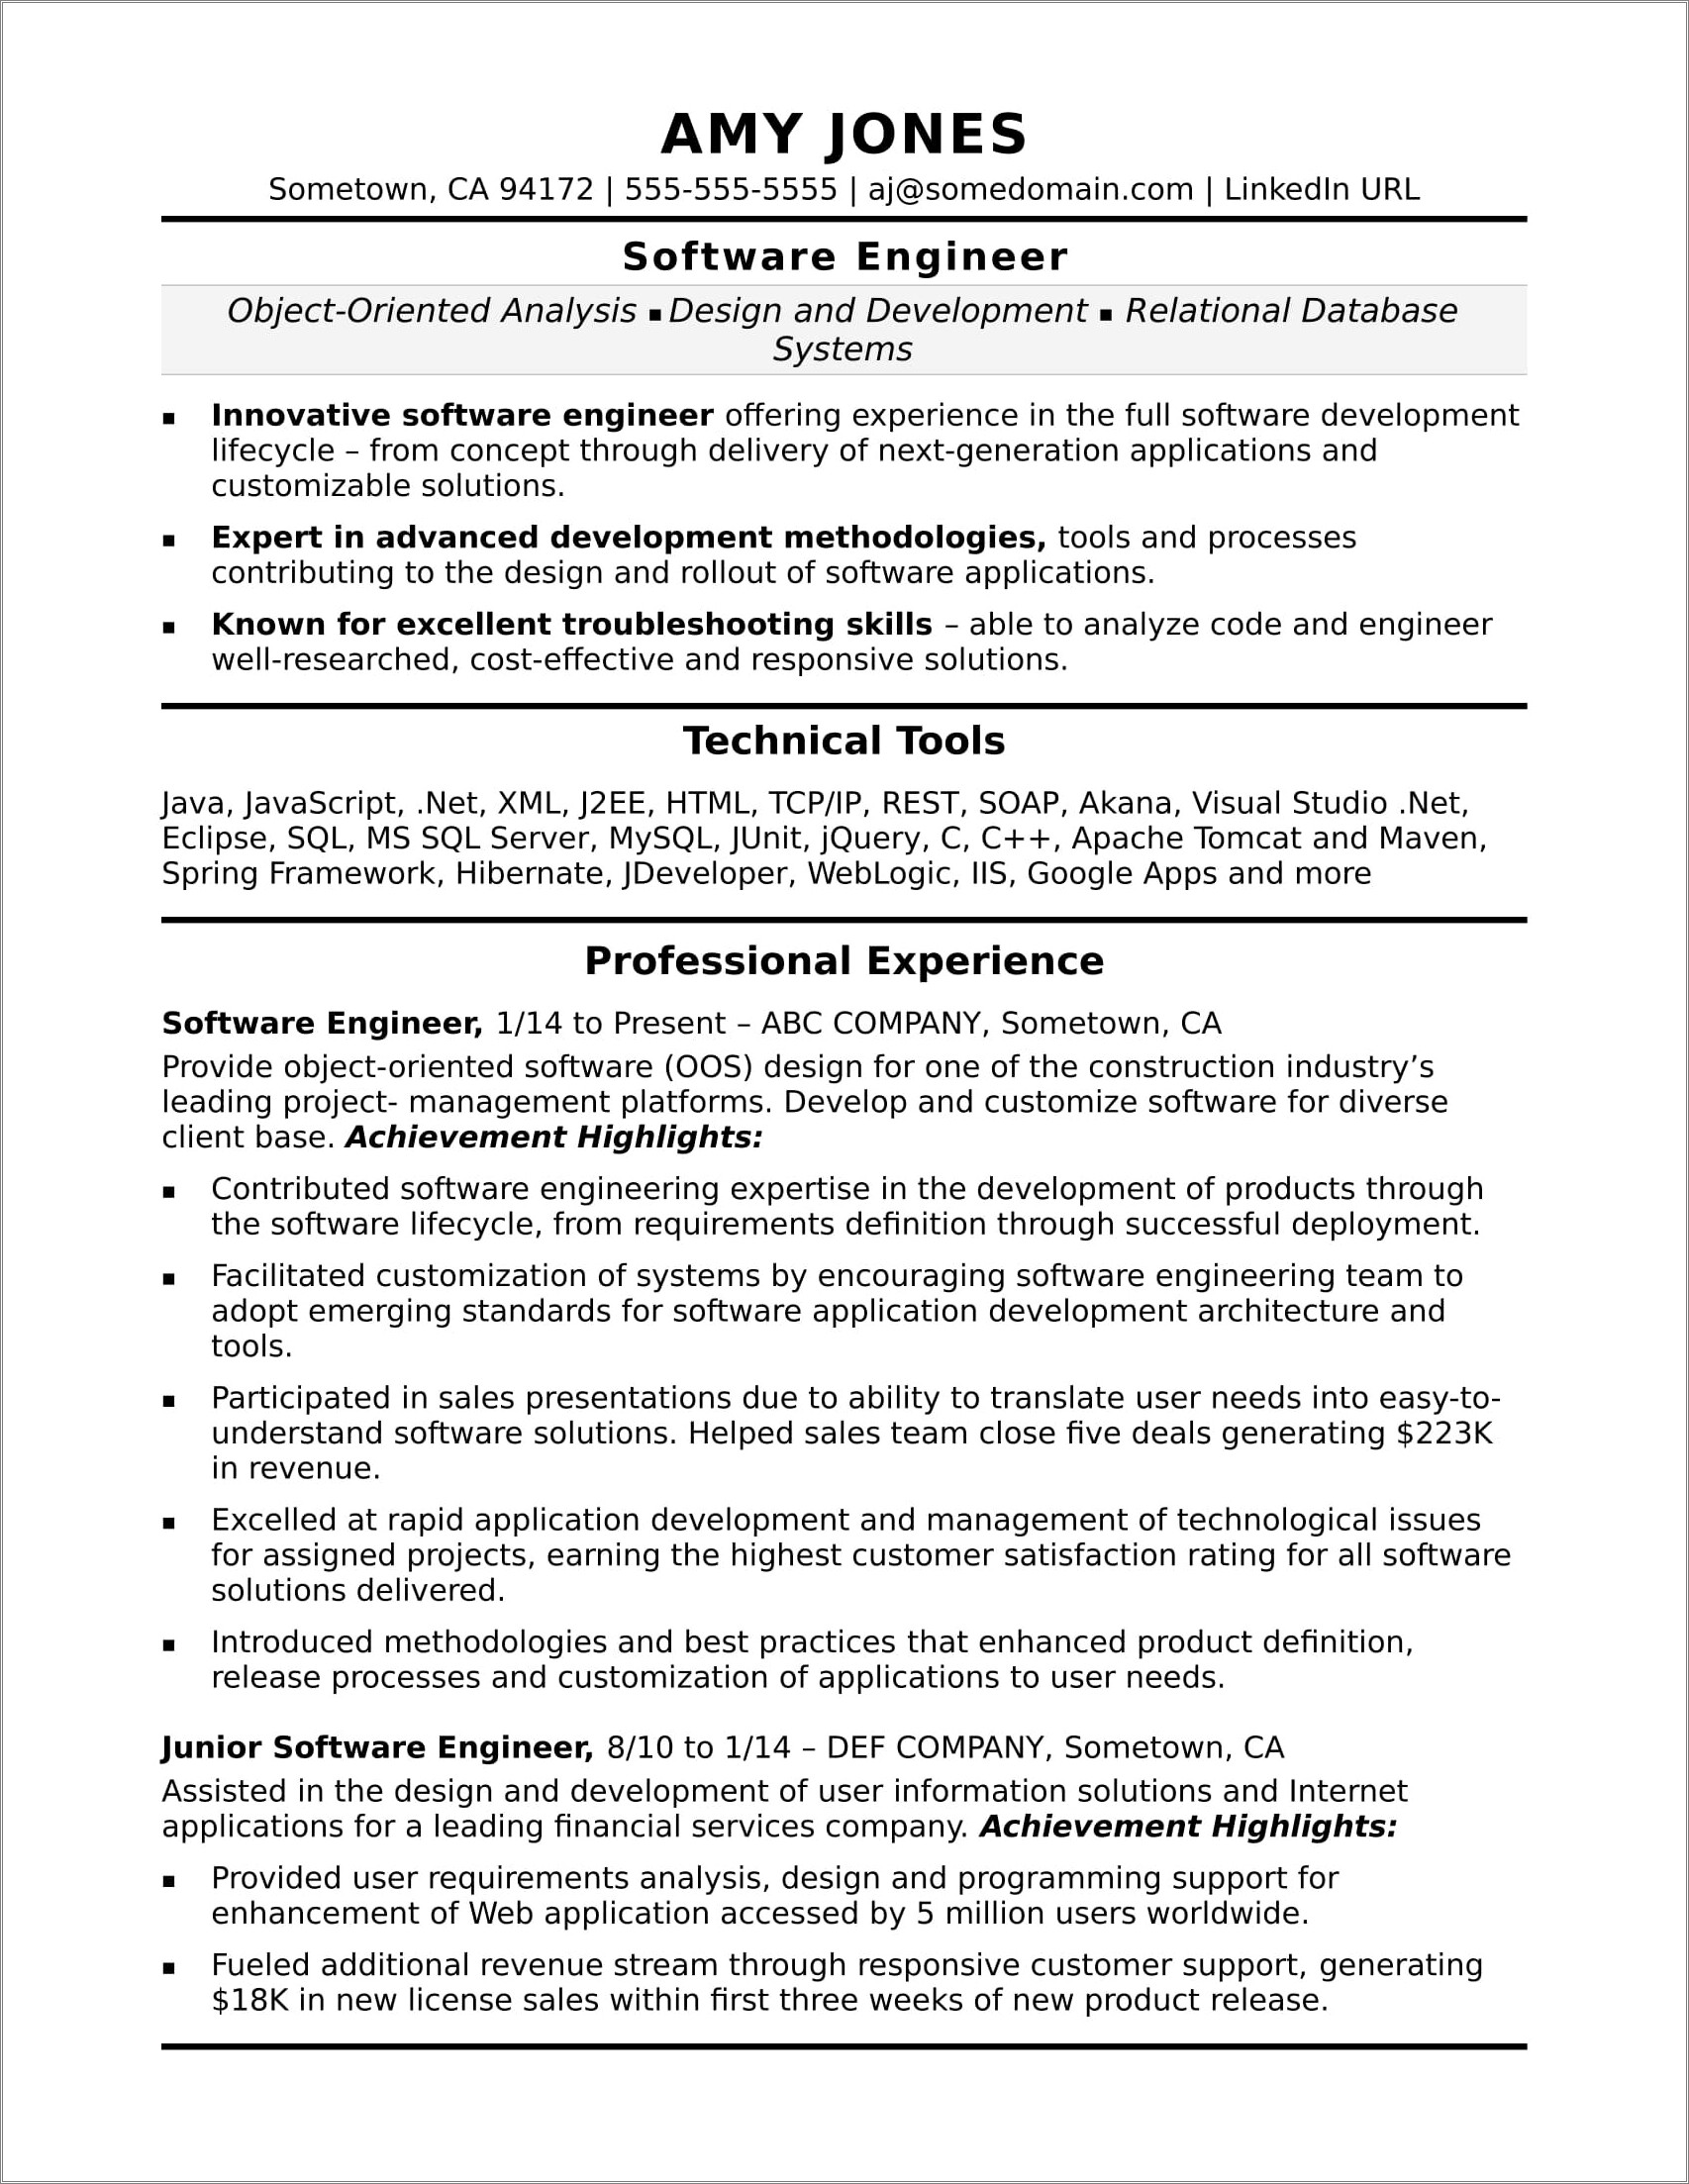 Resume Summary Of Qualifications Bullet Points